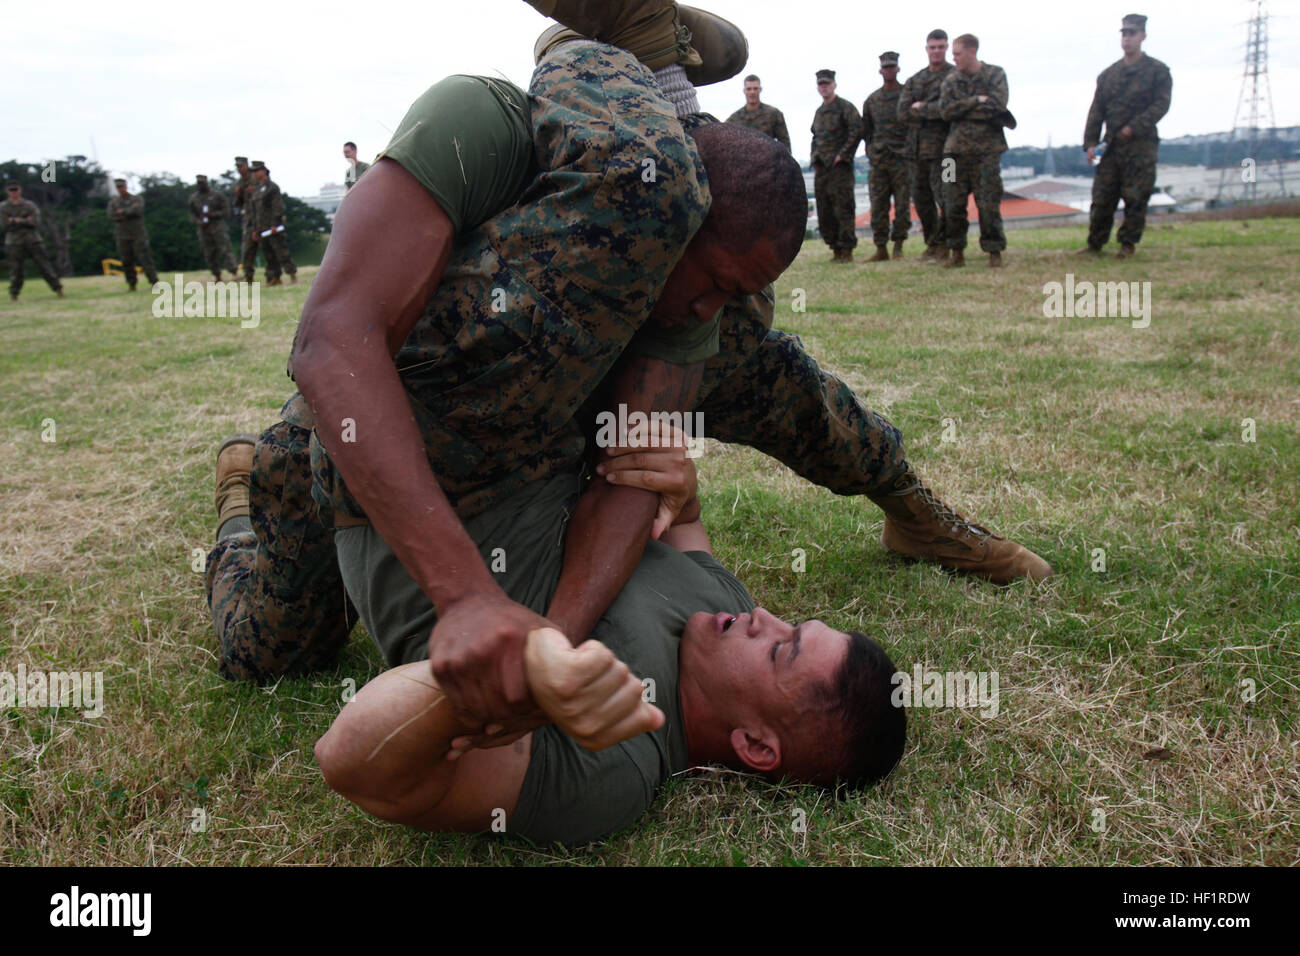 Seaman Kamaal R. David, top, grapples with Navy Lt. Joseph F. Labarbera Nov. 15 at Camp Foster during the 3rd Medical Battalion grappling tournament. The unit conducted the event to show how important fitness and MCMAP are in the Marine Corps. Labarbera is the administrations officer, S-1, administration, 3rd Med. Bn., 3rd Marine Logistics Group, III Marine Expeditionary Force. David is a hospital corpsman with the batalion. 3rd Med. Bn. hosts grappling tournament, tests MCMAP skills 131115-M-MB894-006 Stock Photo